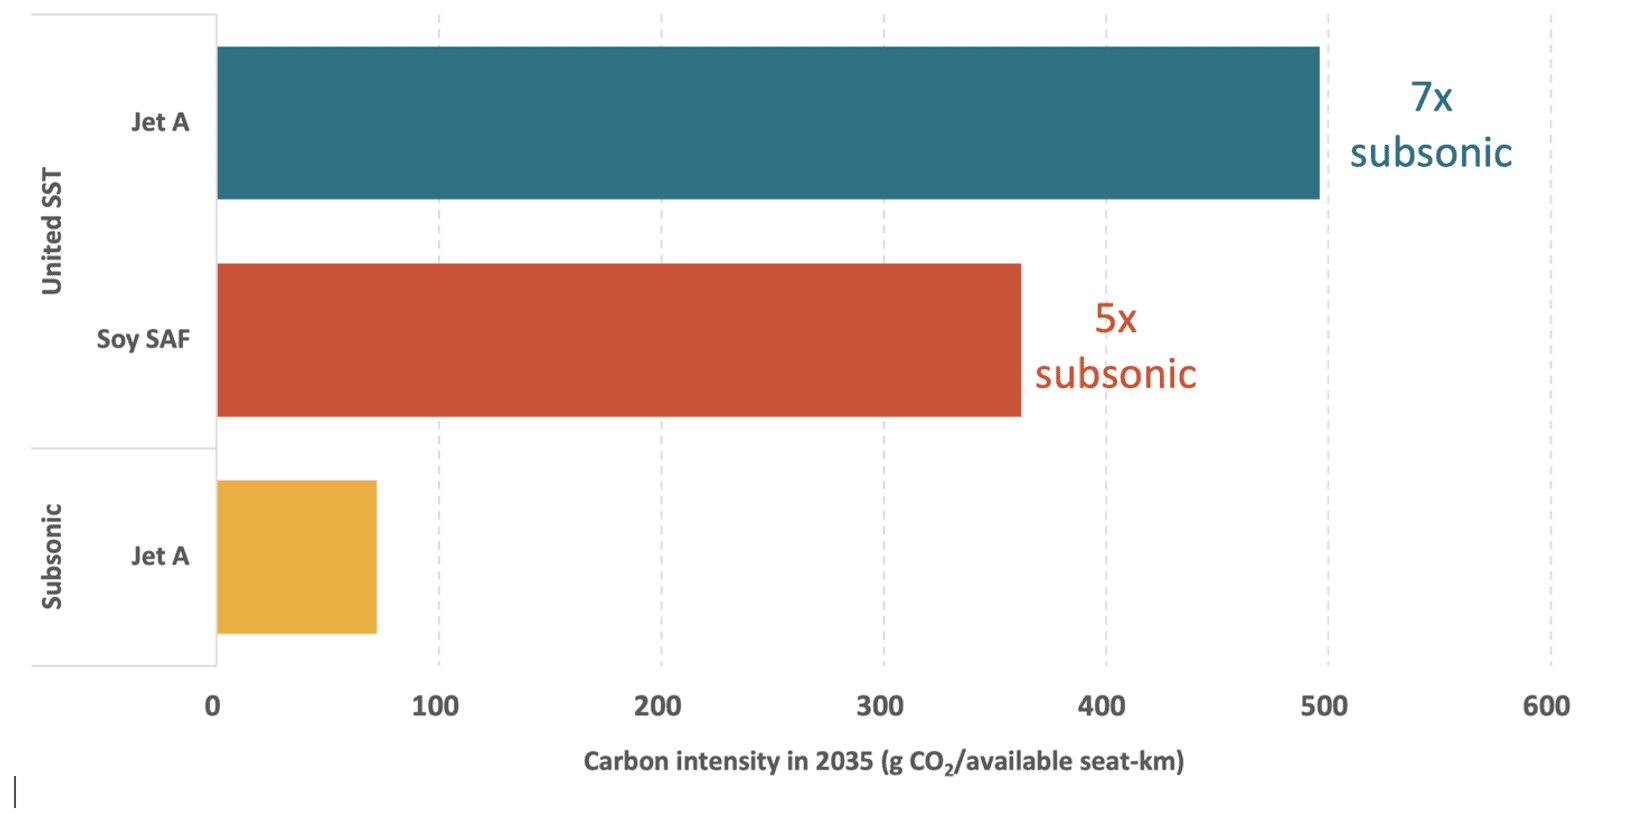 graph of carbon intensity by aircraft and fuel